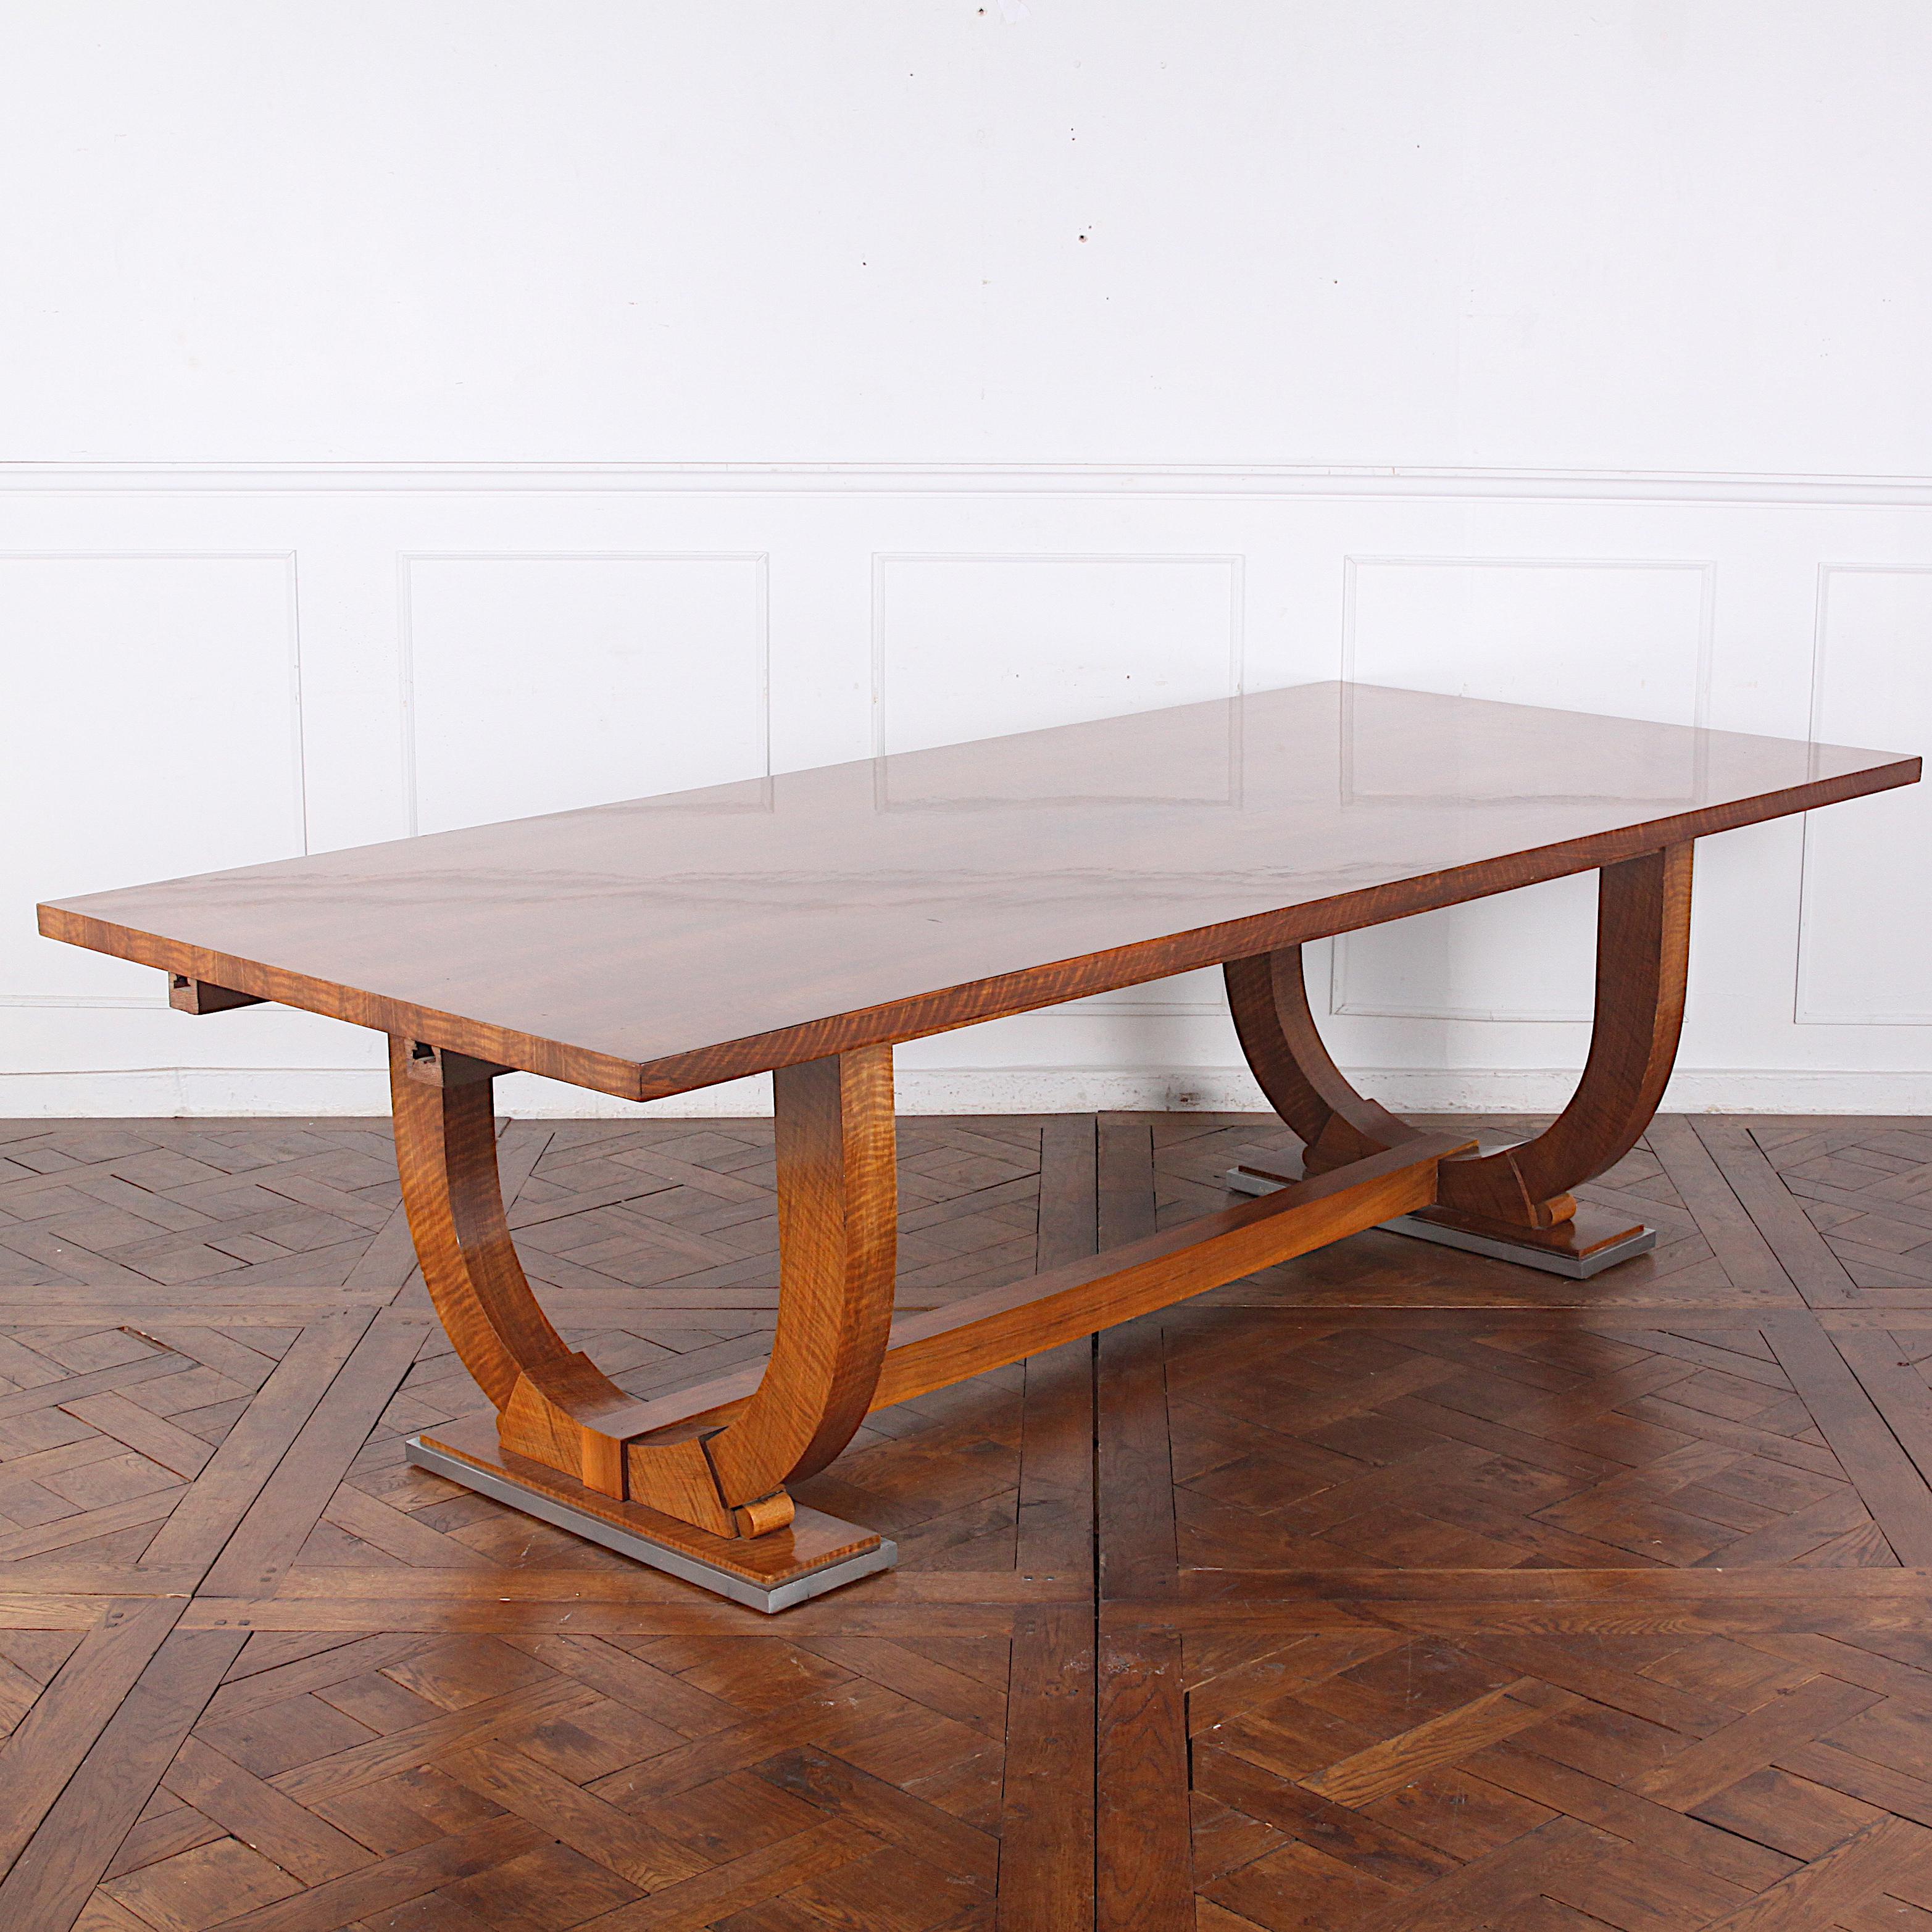 An important French Art Deco period walnut dining table by Parisian designer ‘Jules Leleu’. The simple rectangular plane of the top slab is veneered in figured bookmatched walnut and is supported on two bold U-shaped ends, each resting on a